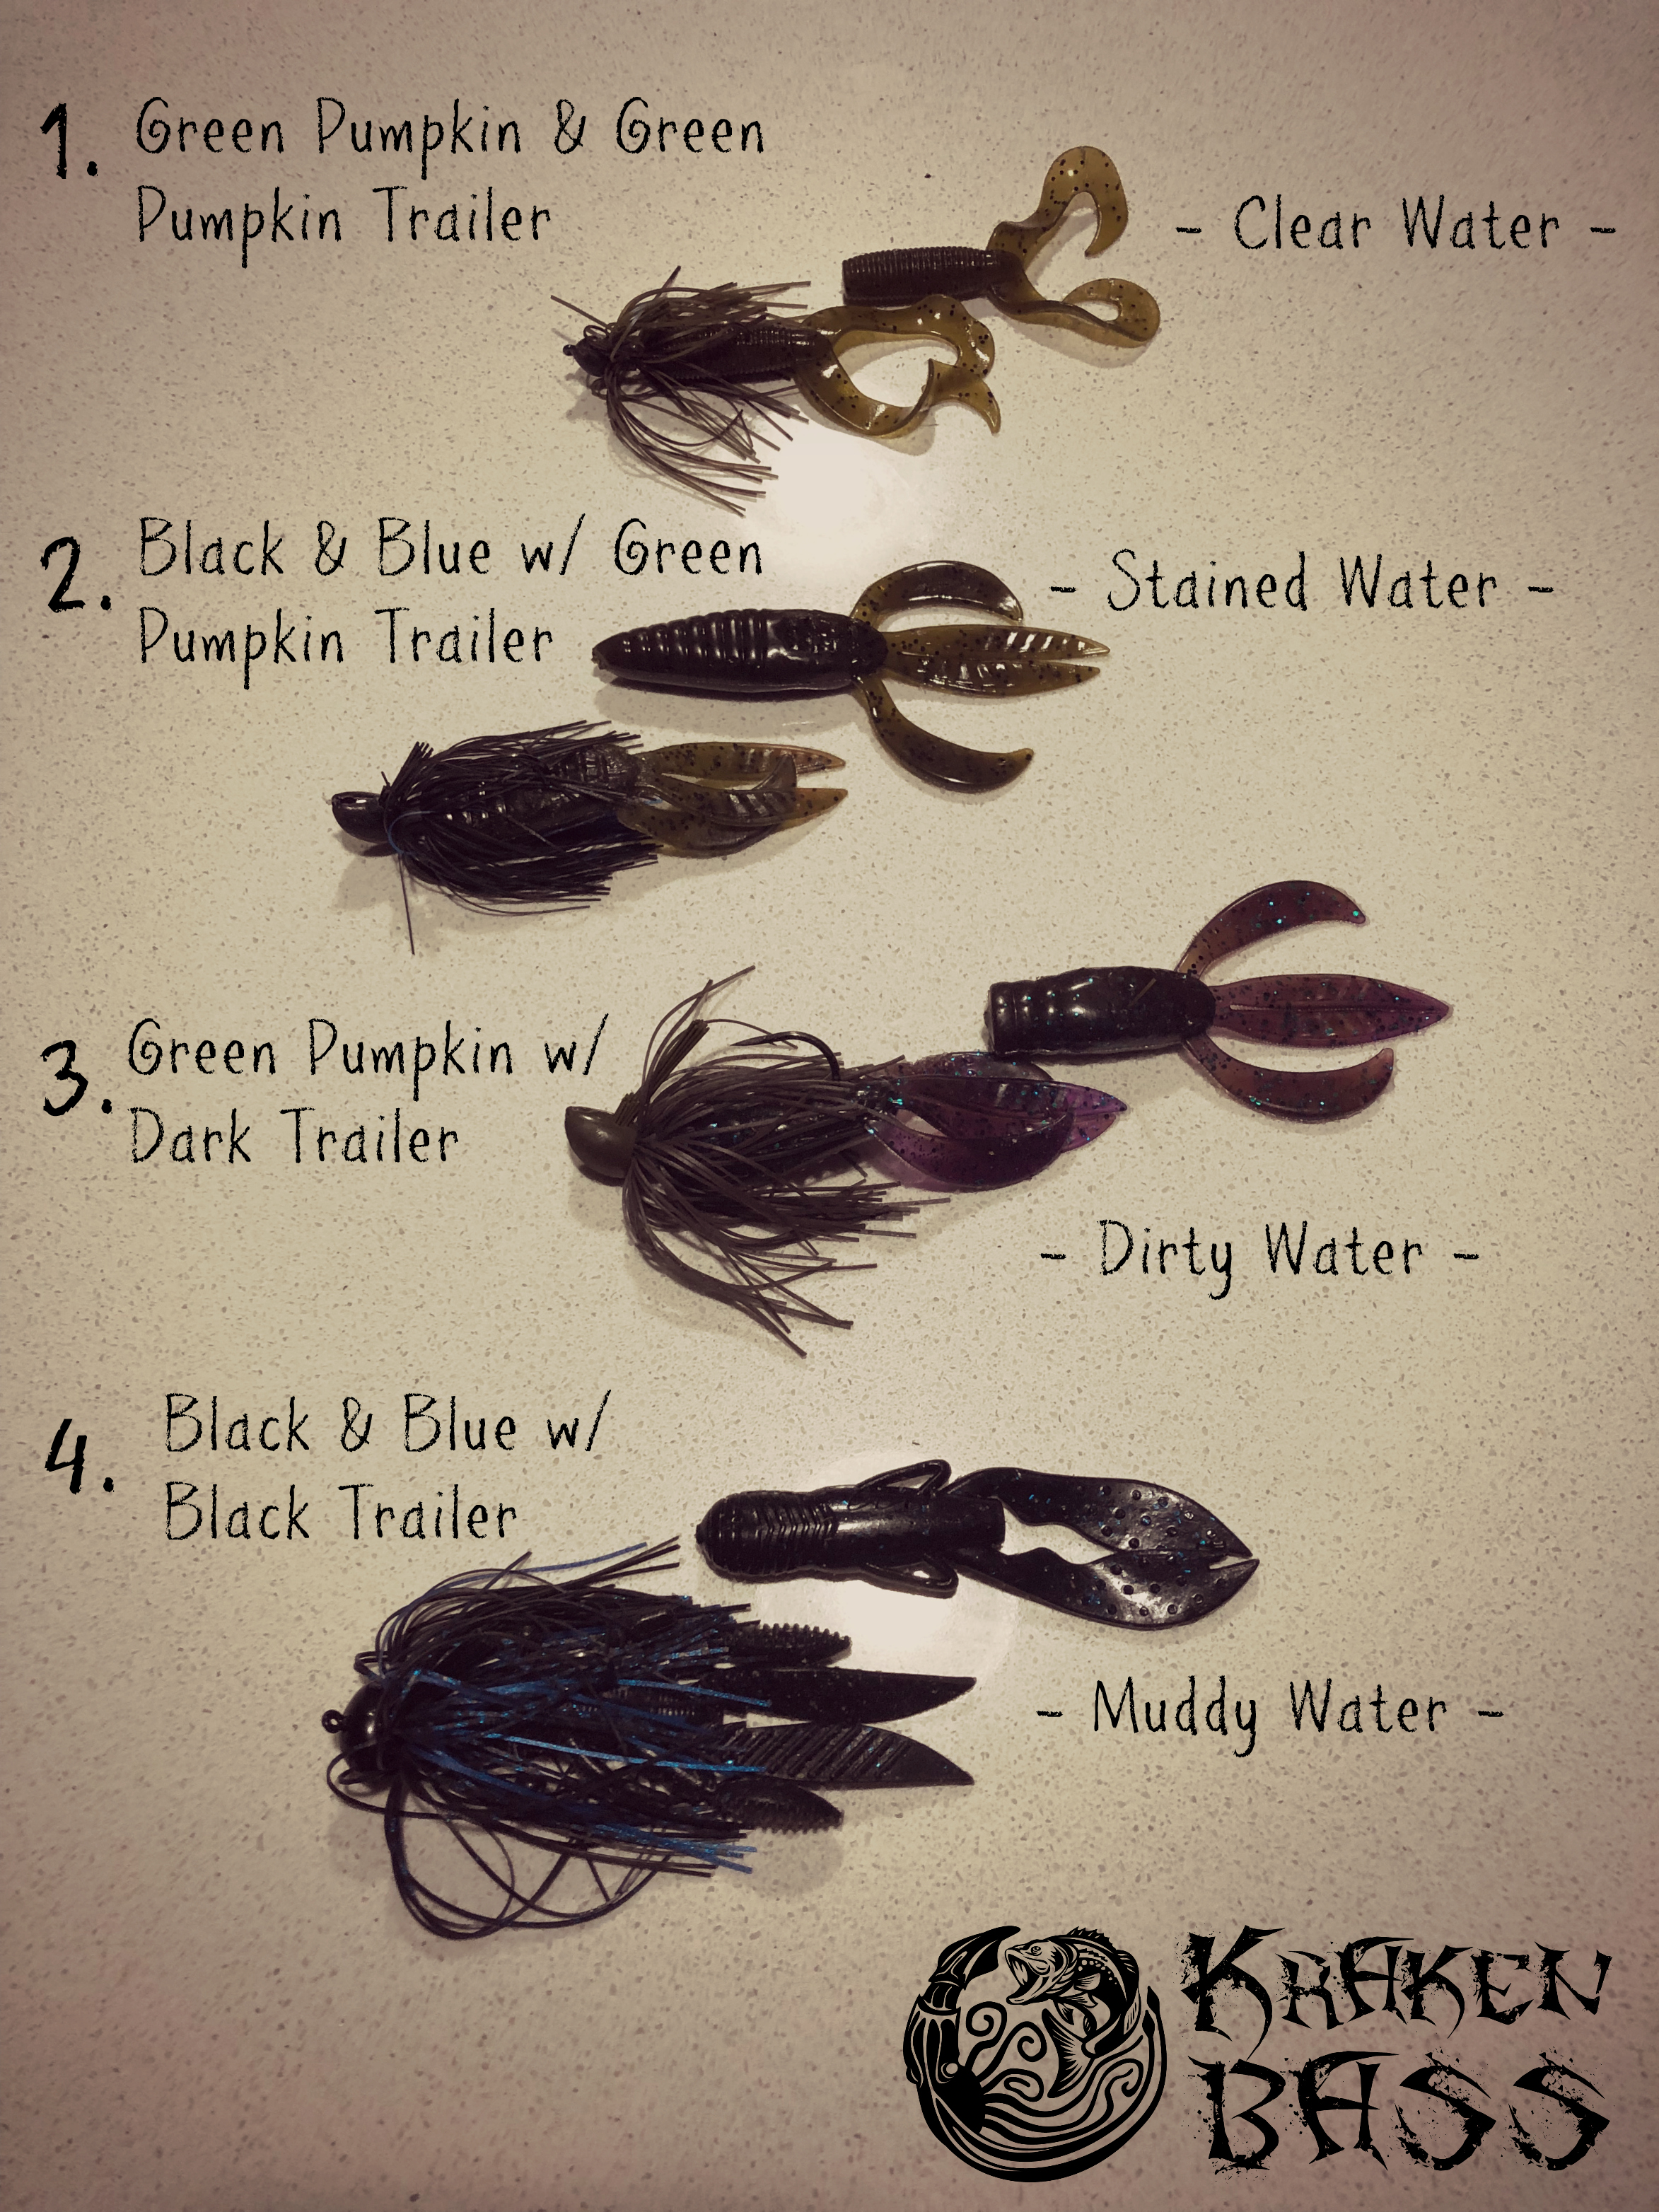 Top Fishing Jig Trailer Color Combo's - Which Jig & Trailer Colors